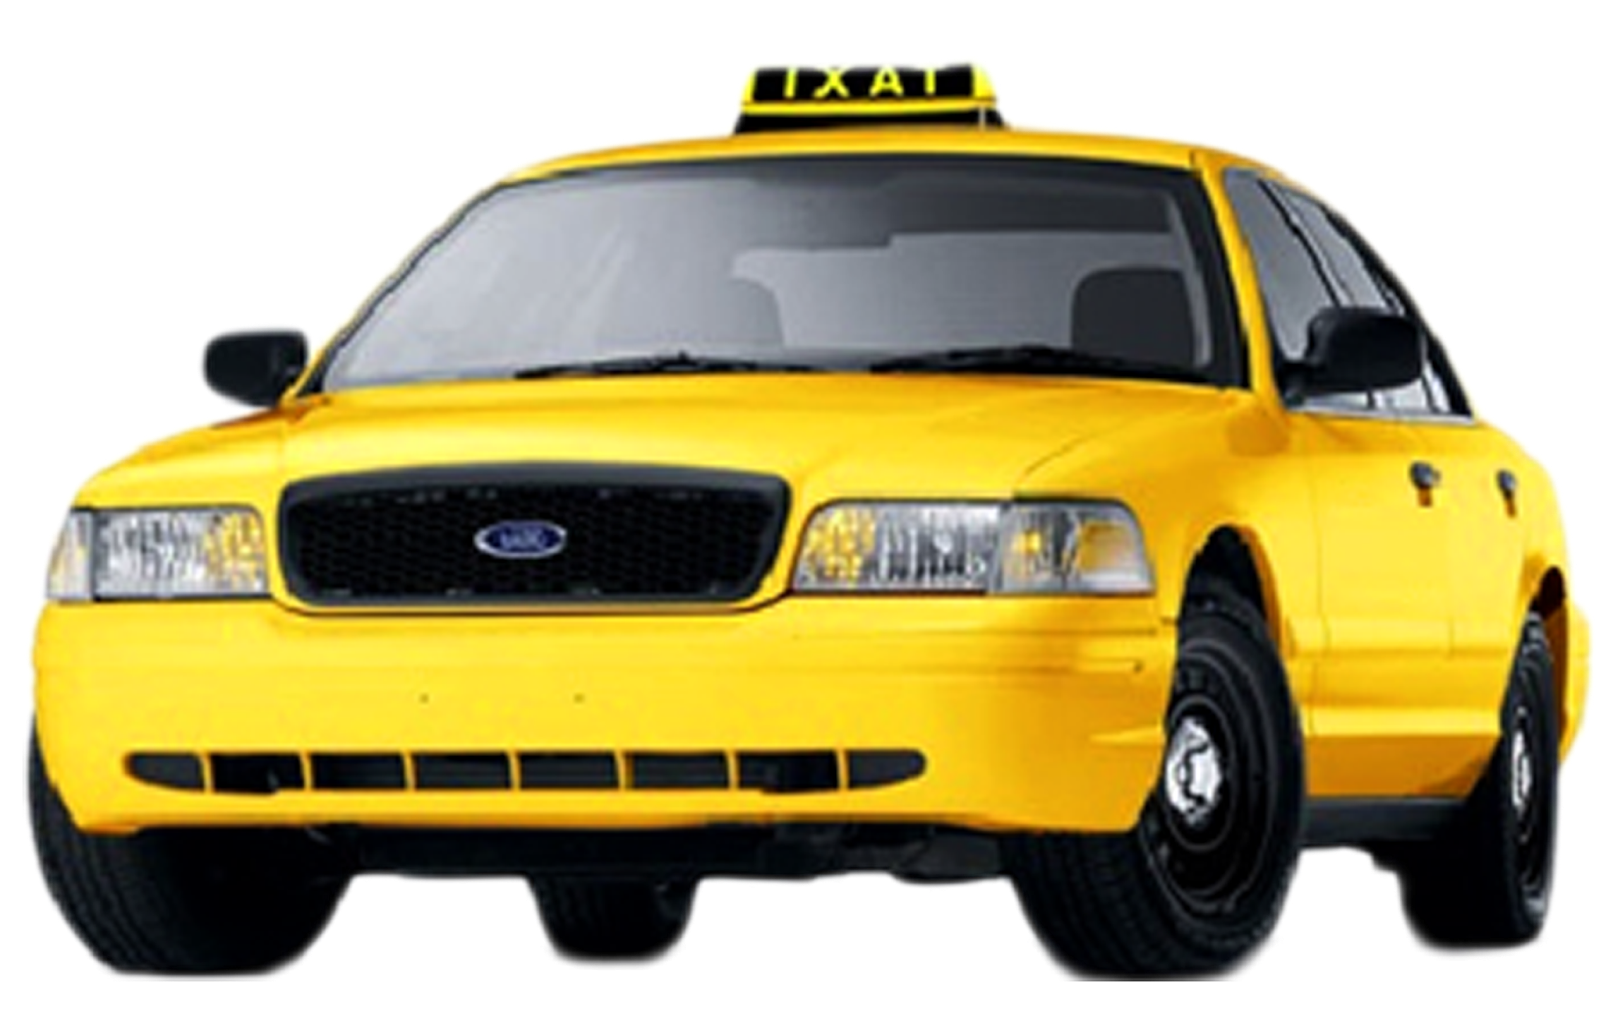 Taxi White Background HD Phot